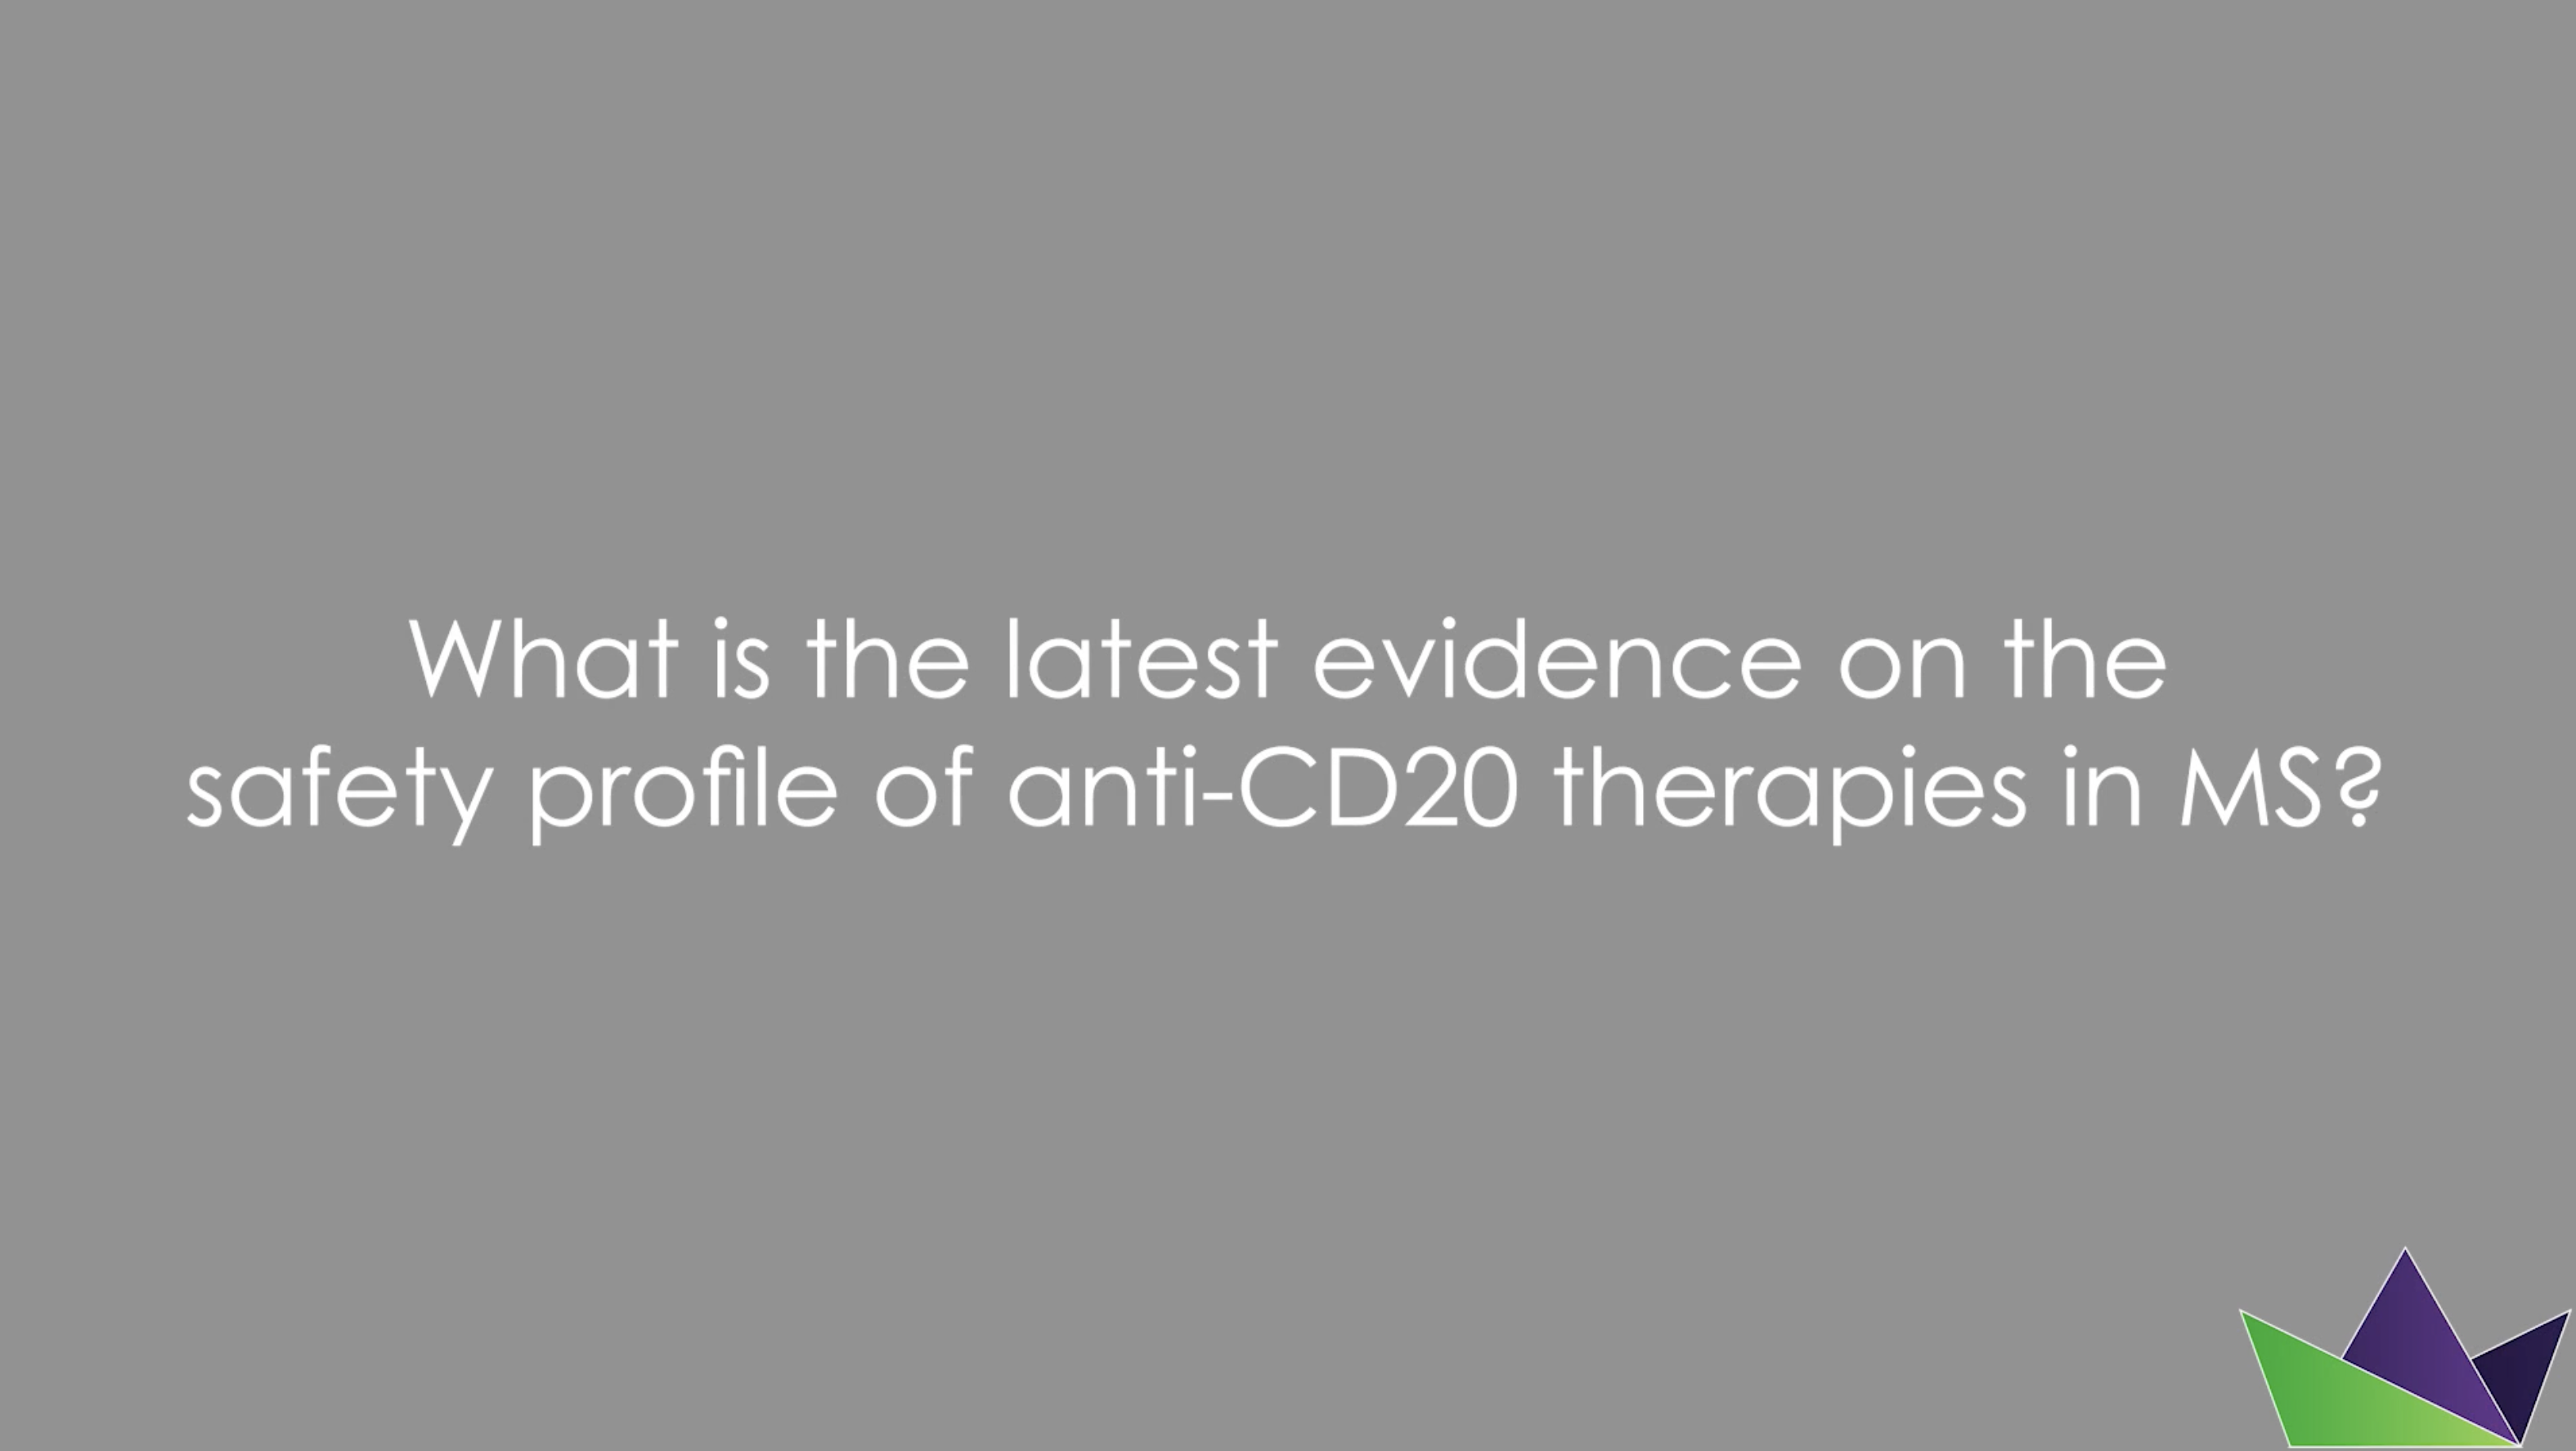 What is the latest evidence on the safety profile of anti-CD20 therapies in MS